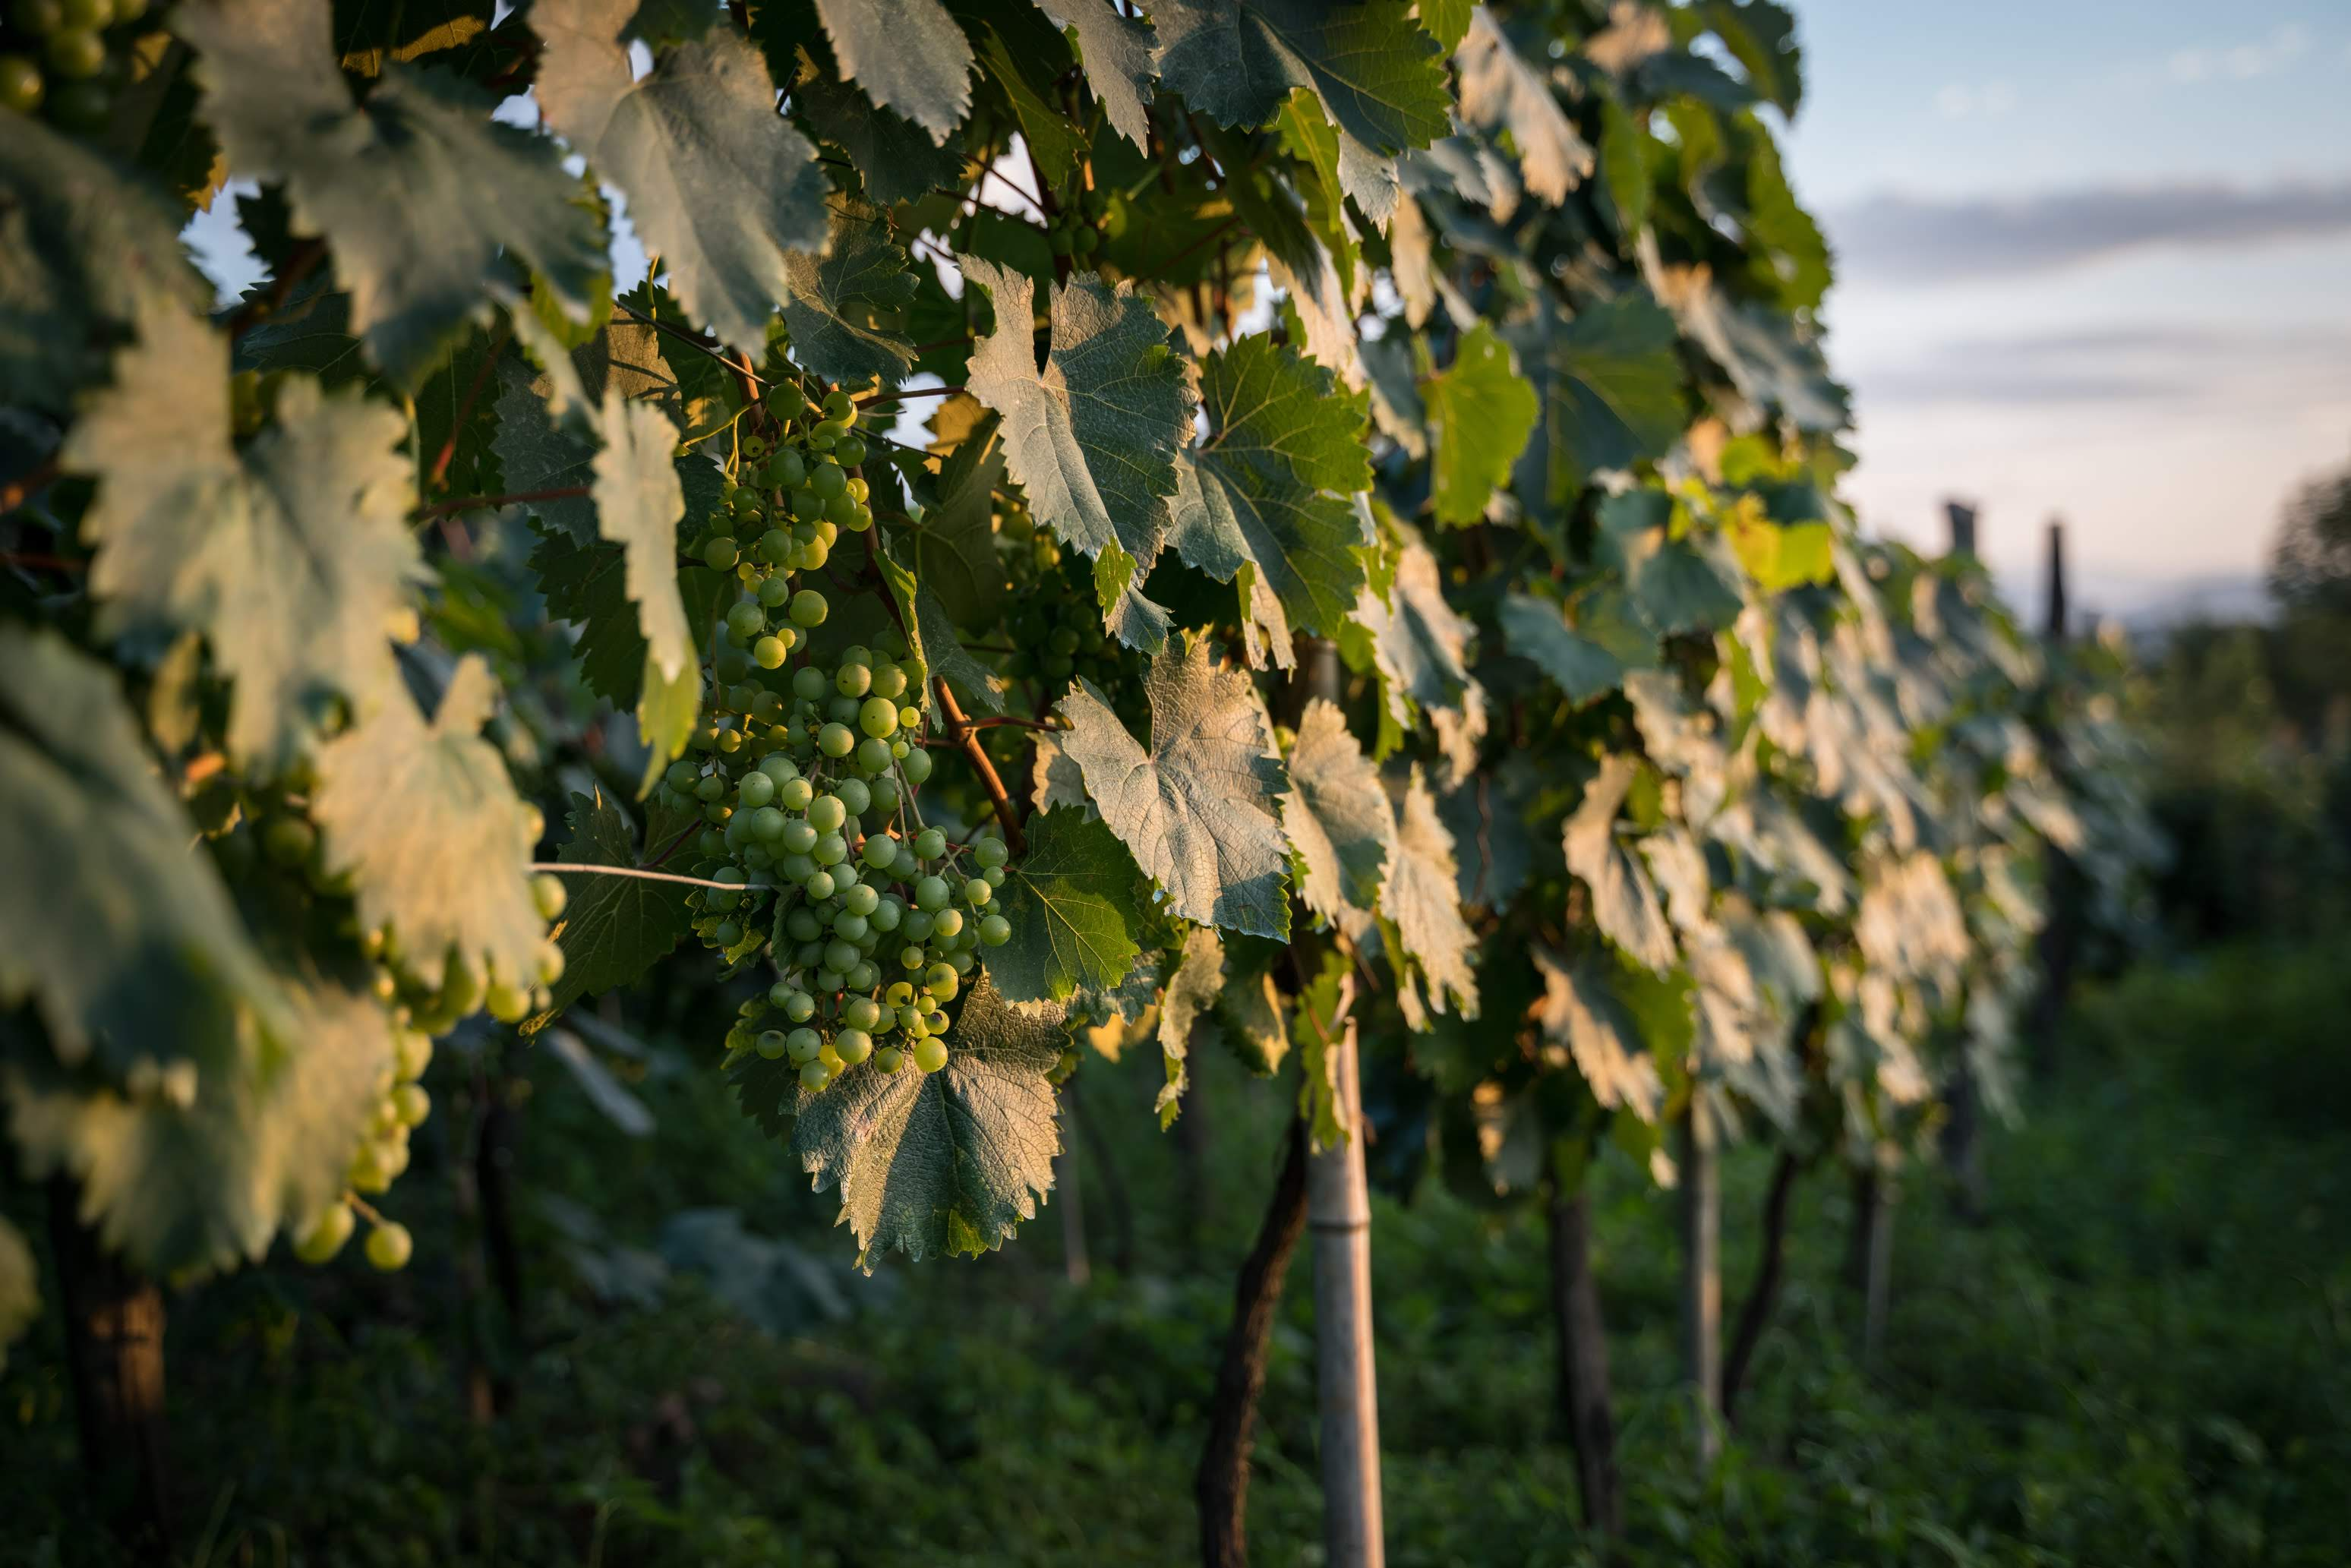 Vineyard with ripe white grapes